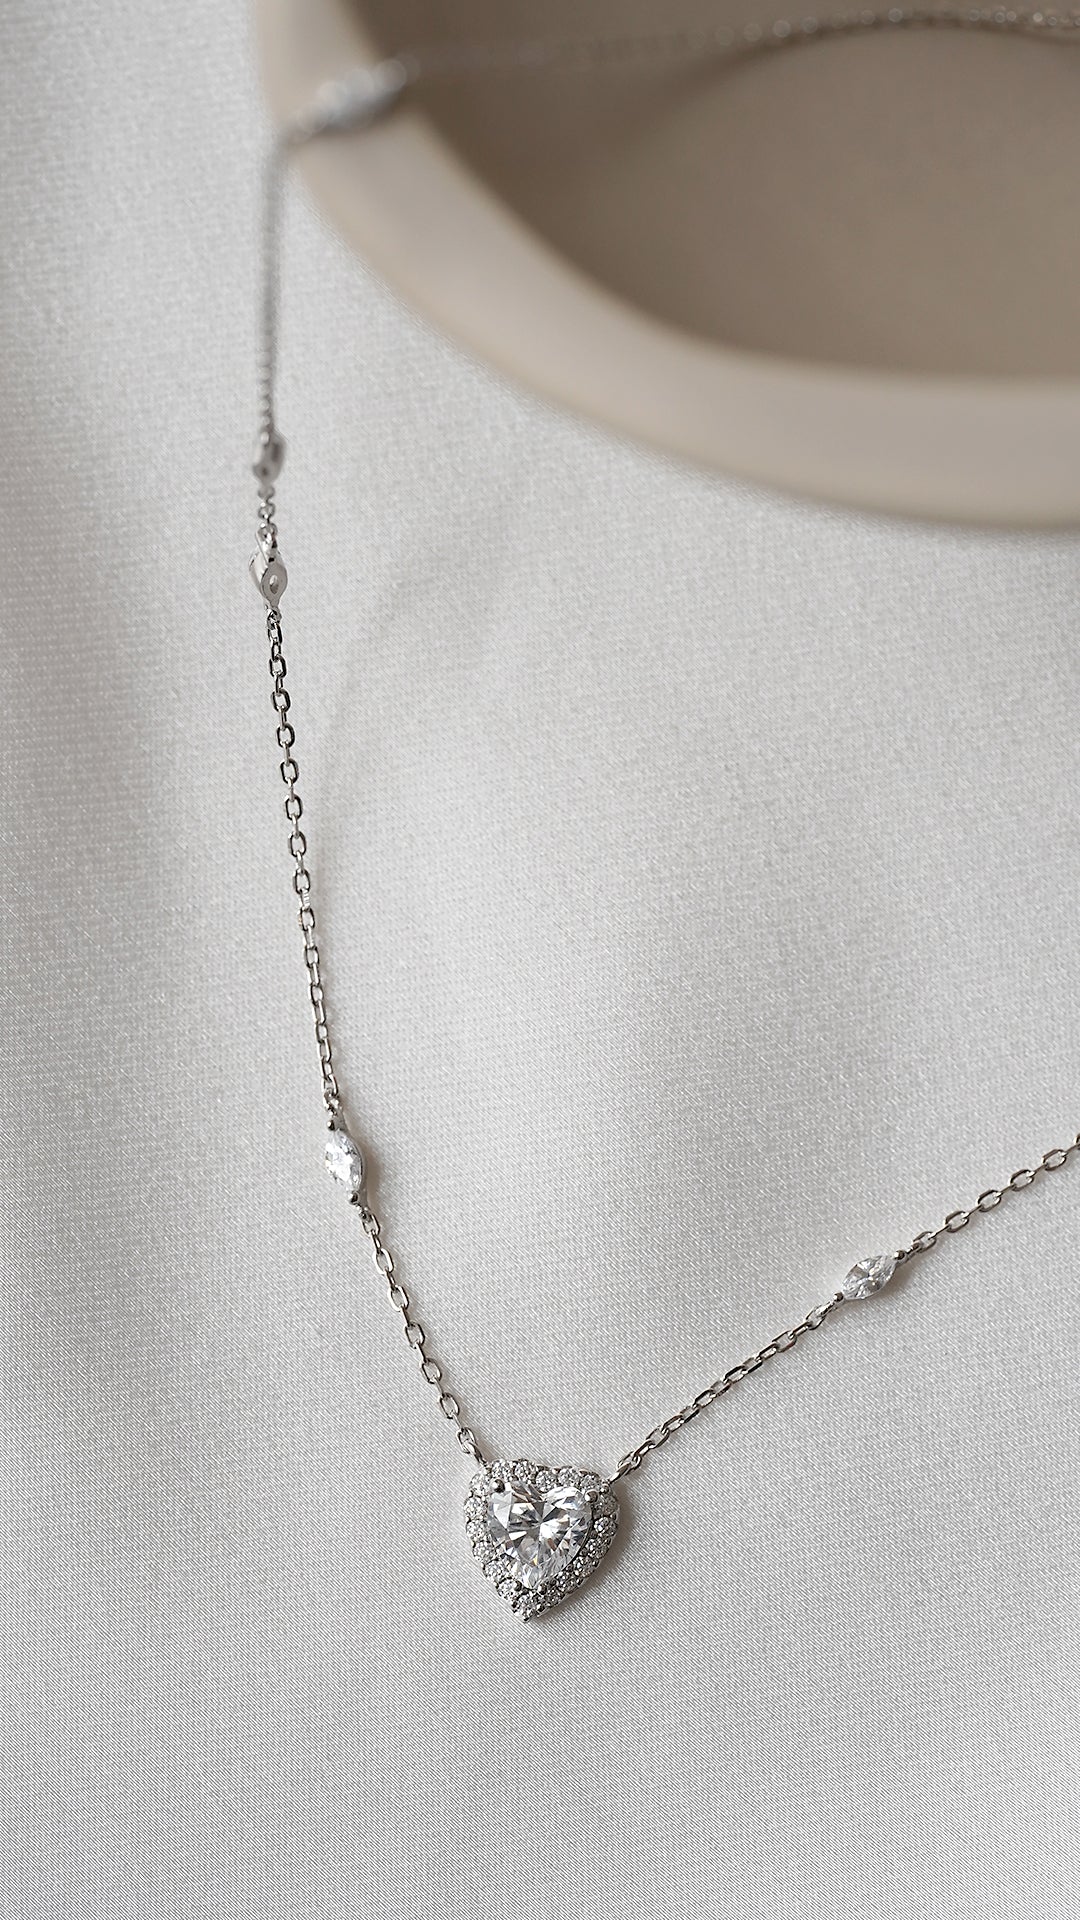 Cora Necklace White Gold Plated